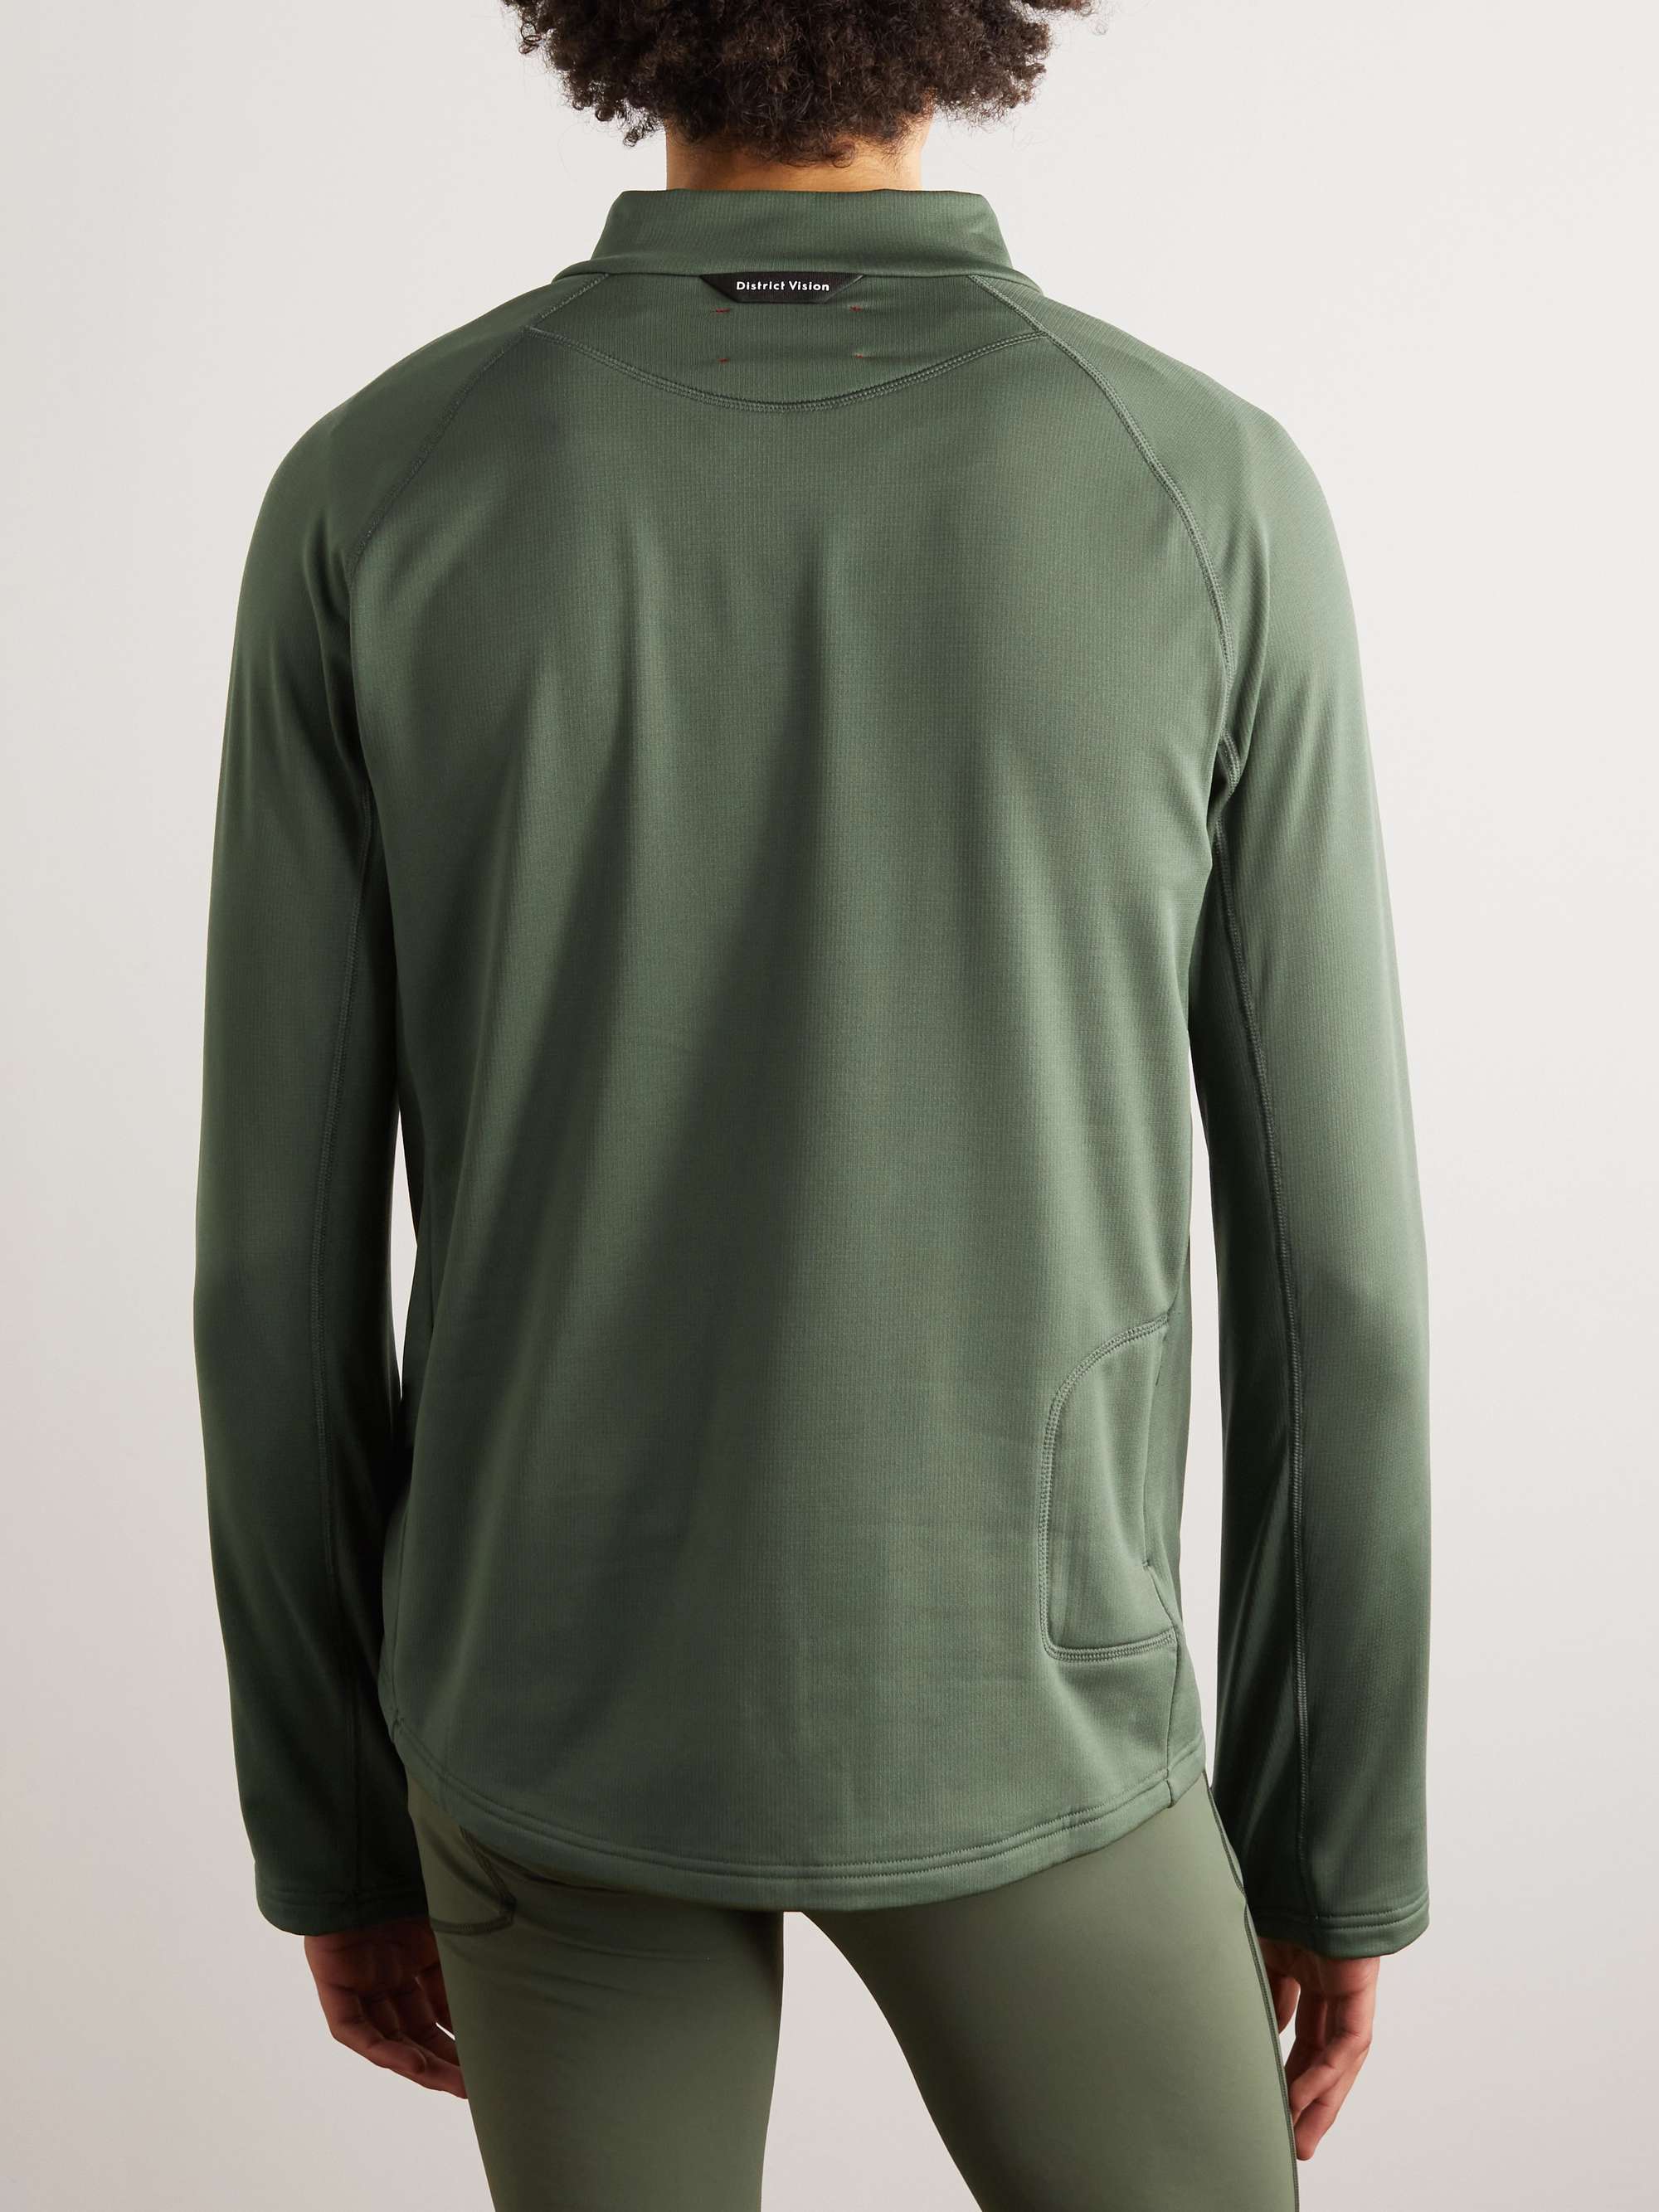 DISTRICT VISION Luca Shell-Trimmed Stretch Recycled-Ripstop Running Top